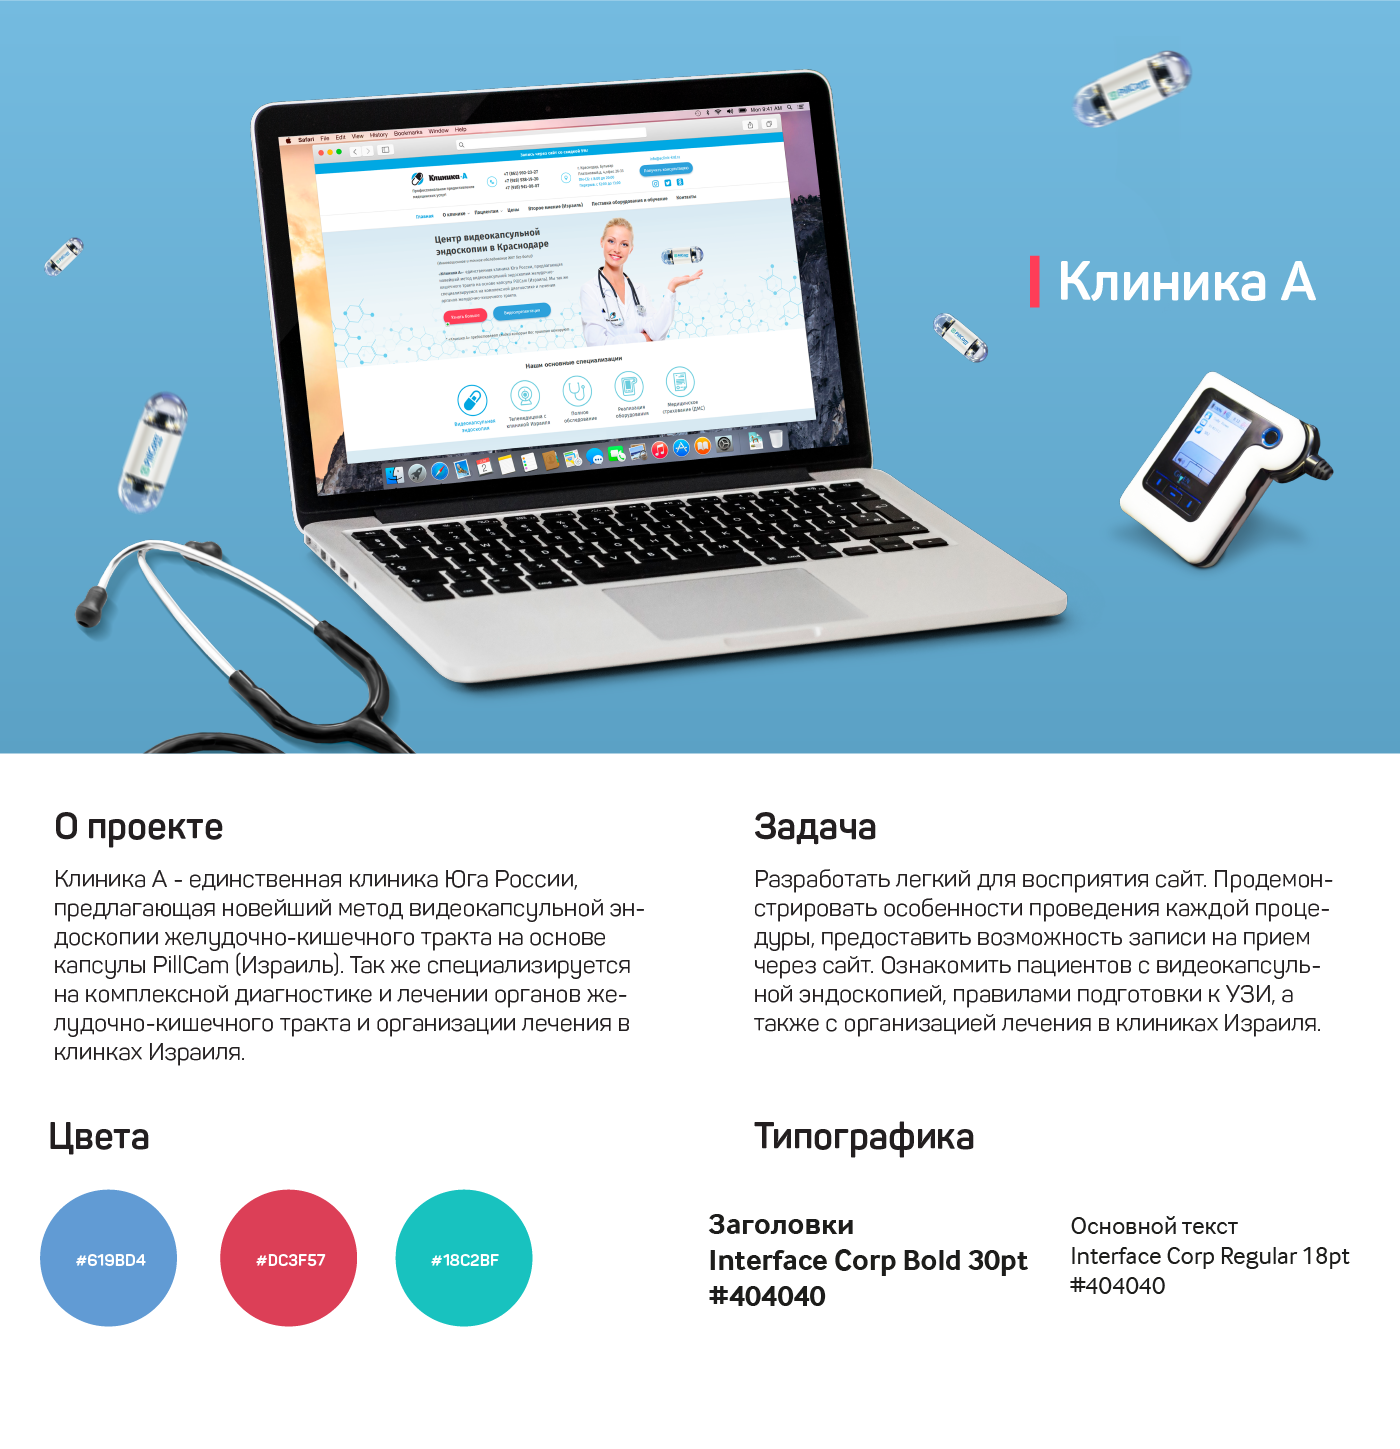 Web landing site medical clinic Health doctor клиника медицина лечение